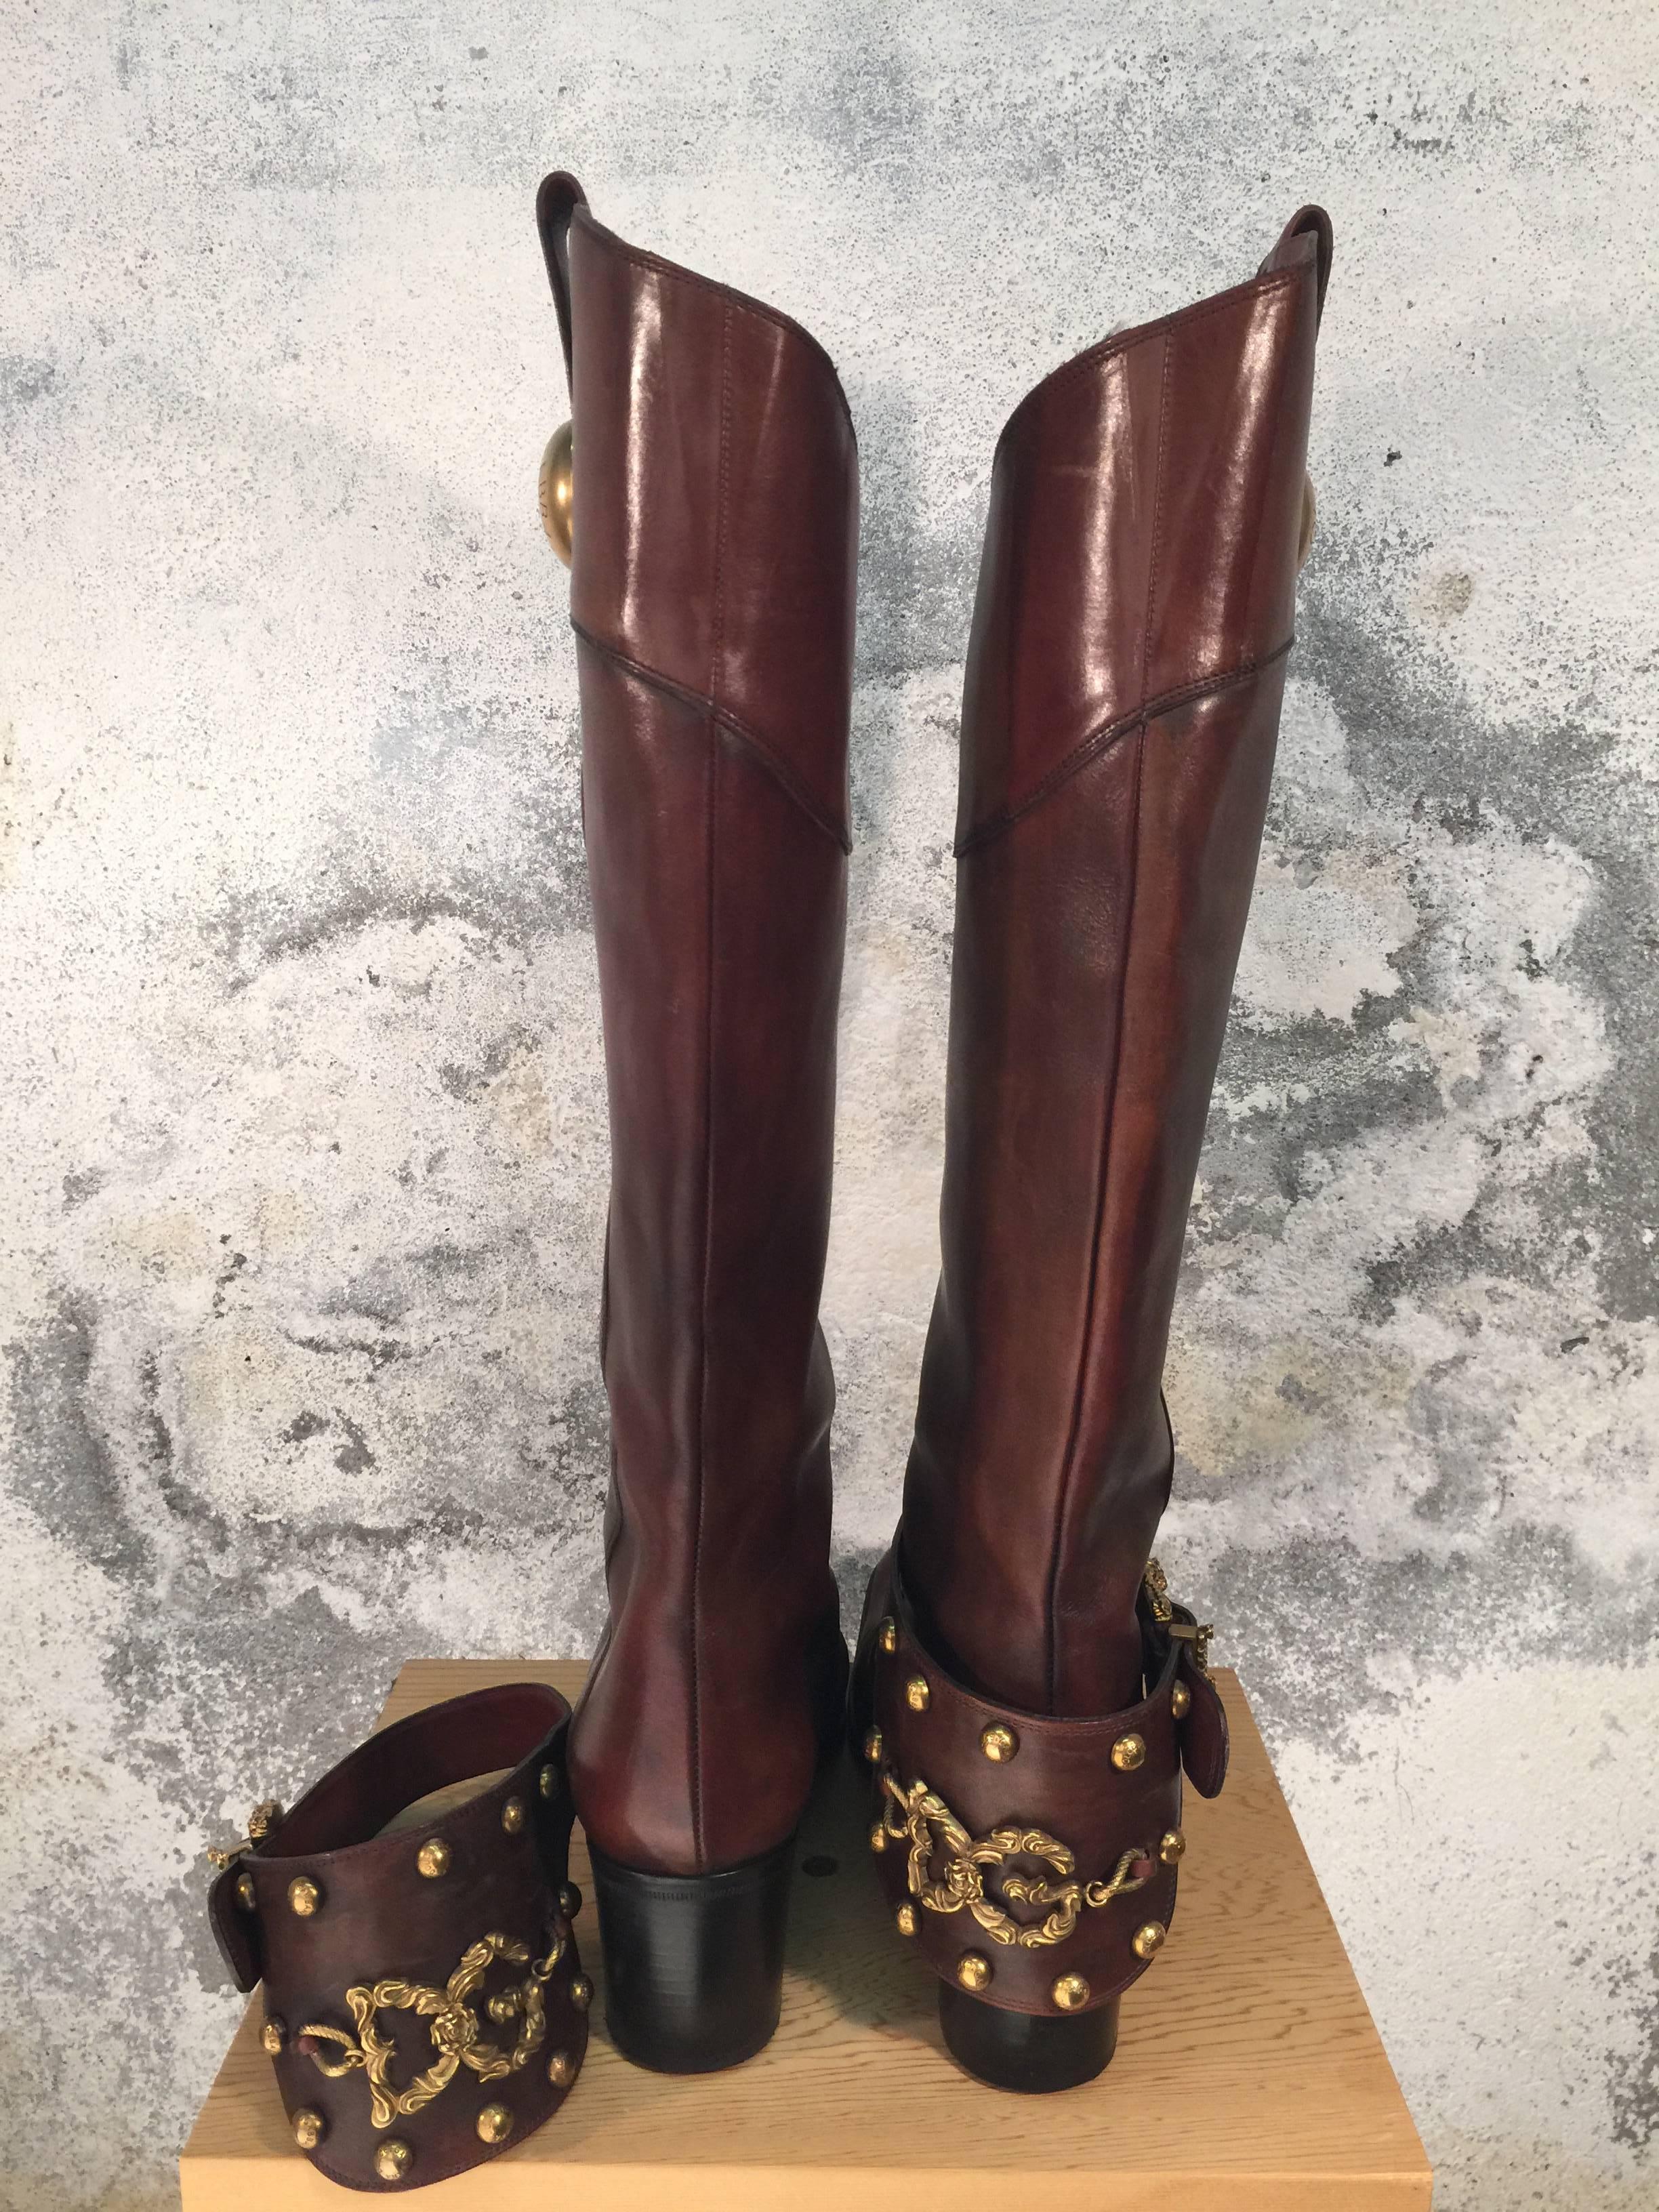 Brown Dolce & Gabbana boots from the romantic-baroque collection of fall 2006, covered with lavish embellishment, golden leather lining - brings a new meaning to basic brown.
Aged look leather.
Metal logo buckle ( removable ). Size 40
Fastening: